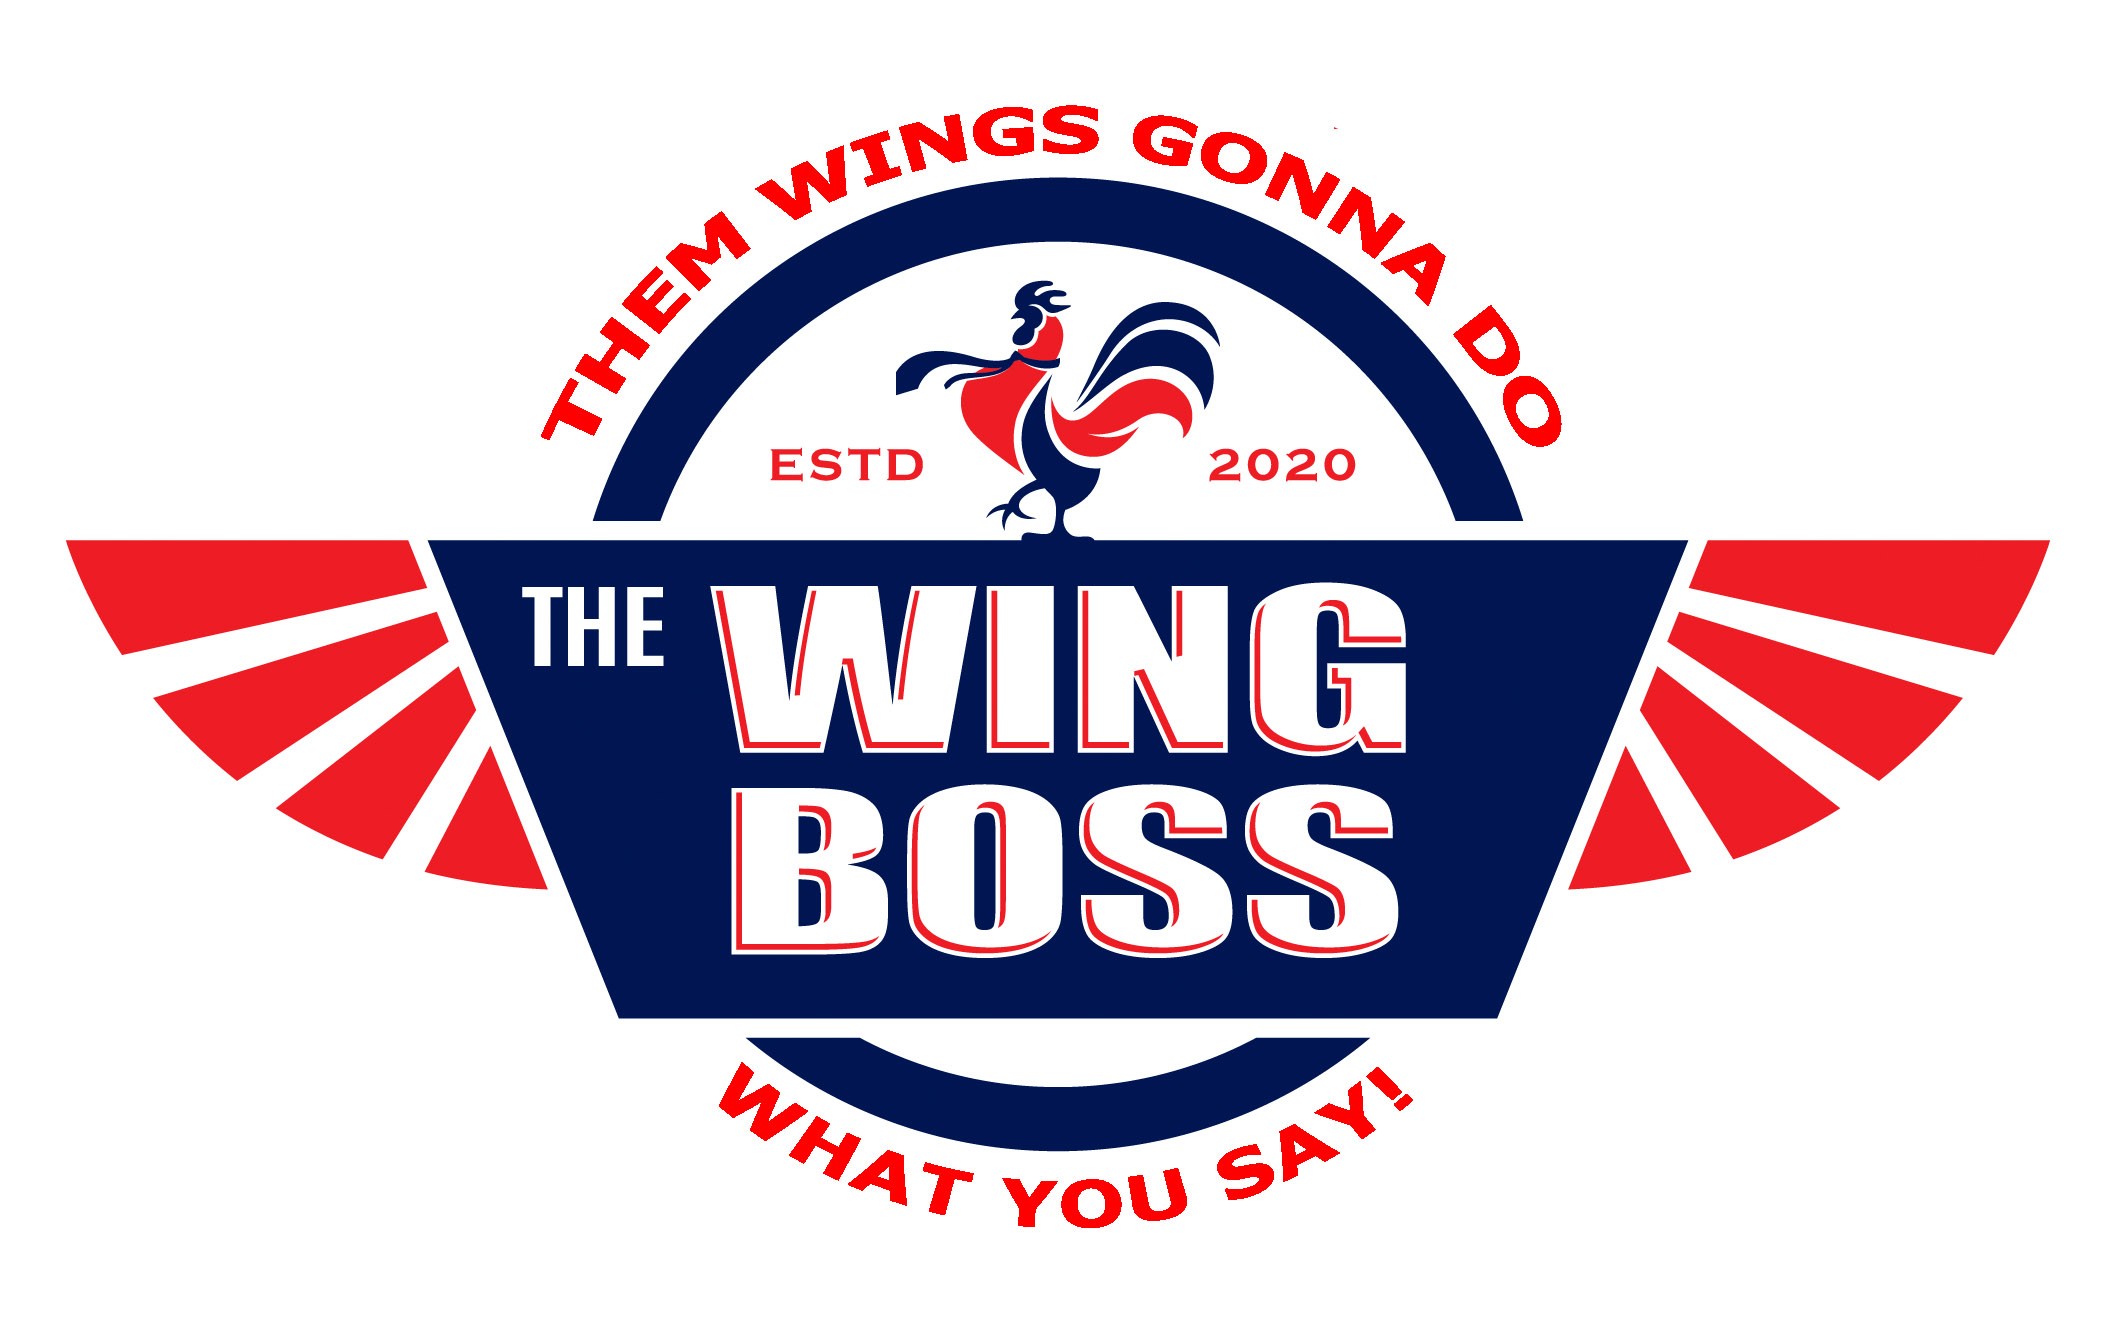 The Wing Boss